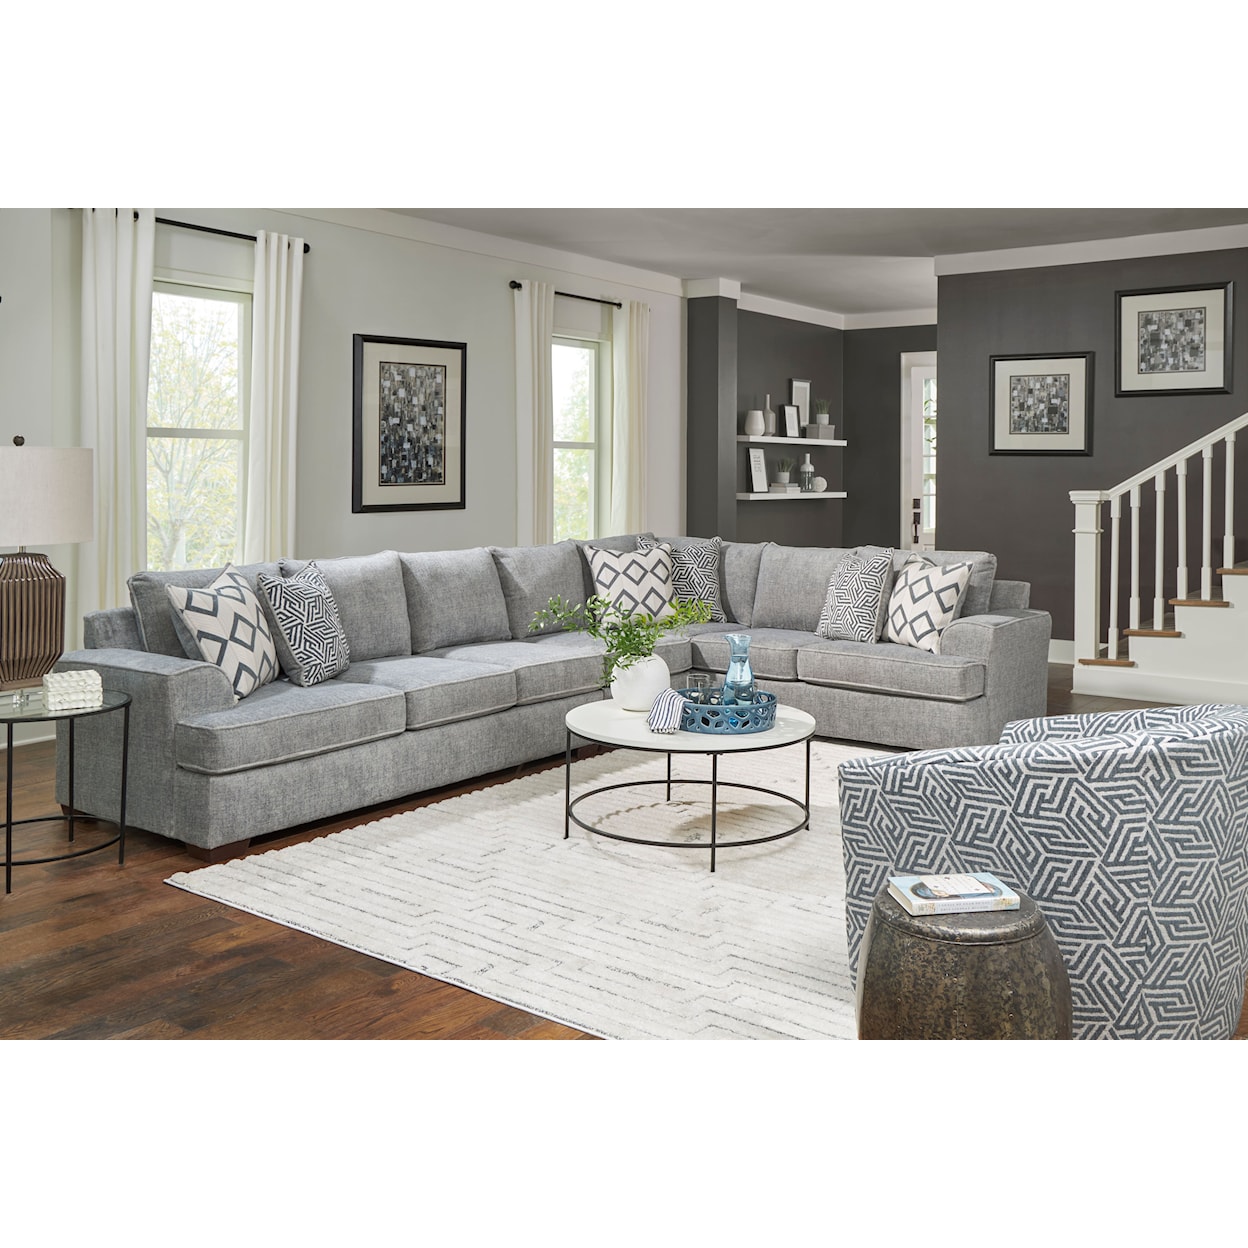 Behold Home 2580 Ritzy Sectional Sofa